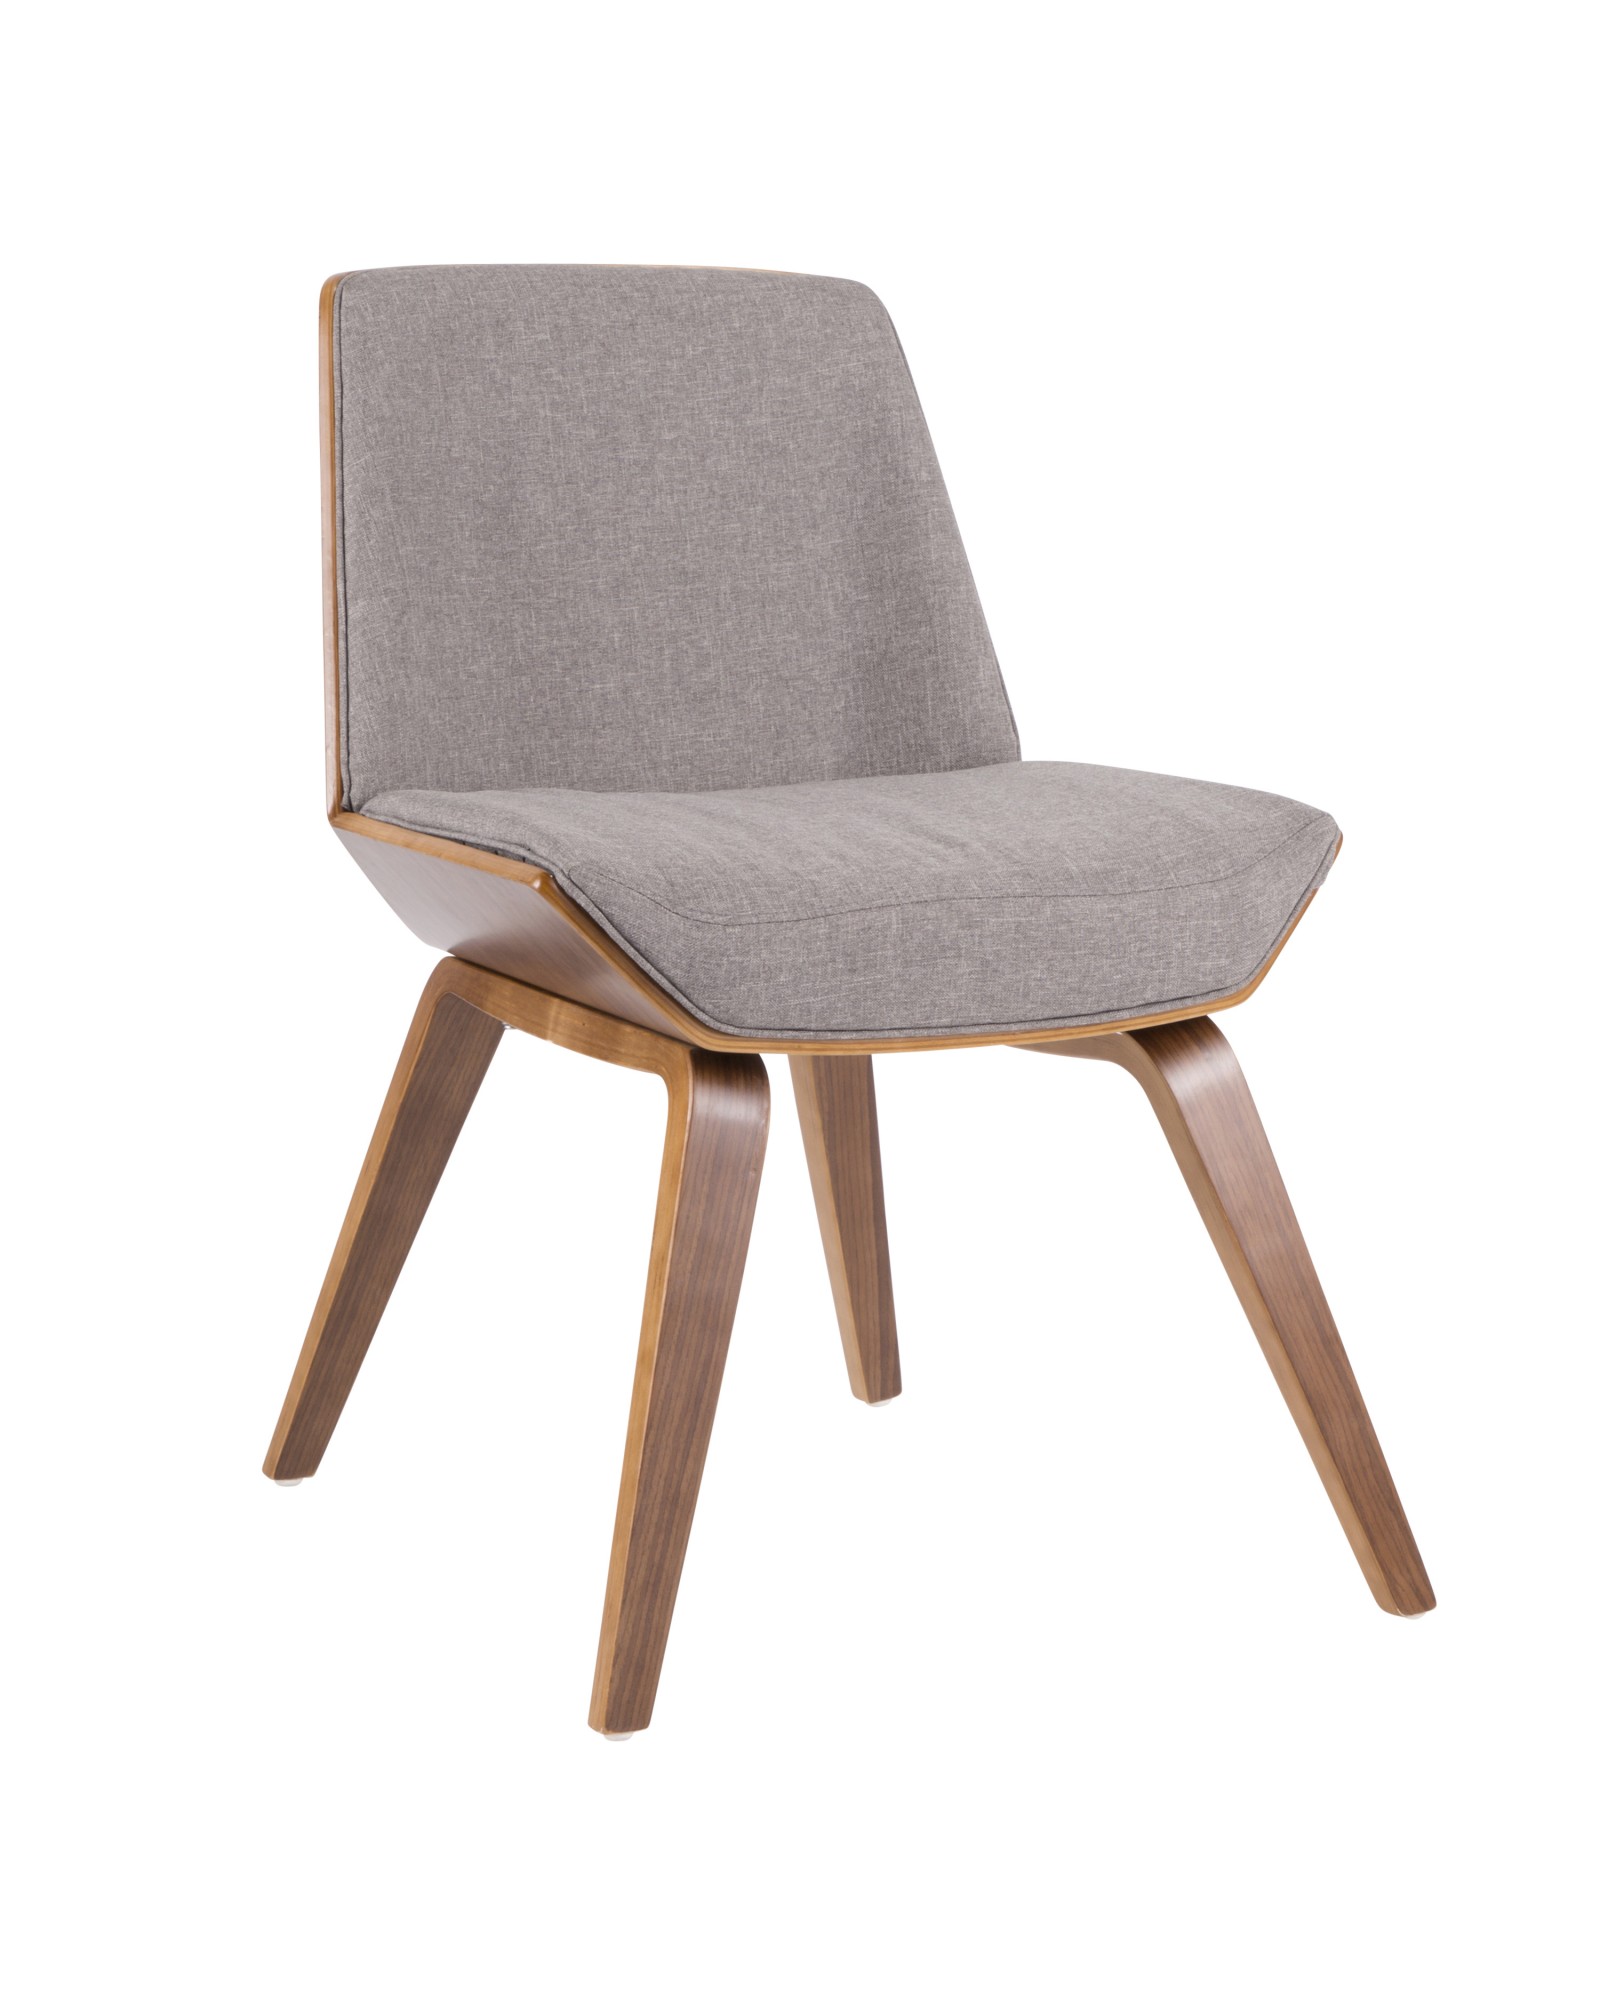 Corazza Mid-Century Modern Dining/Accent Chair in Walnut and Grey Fabric